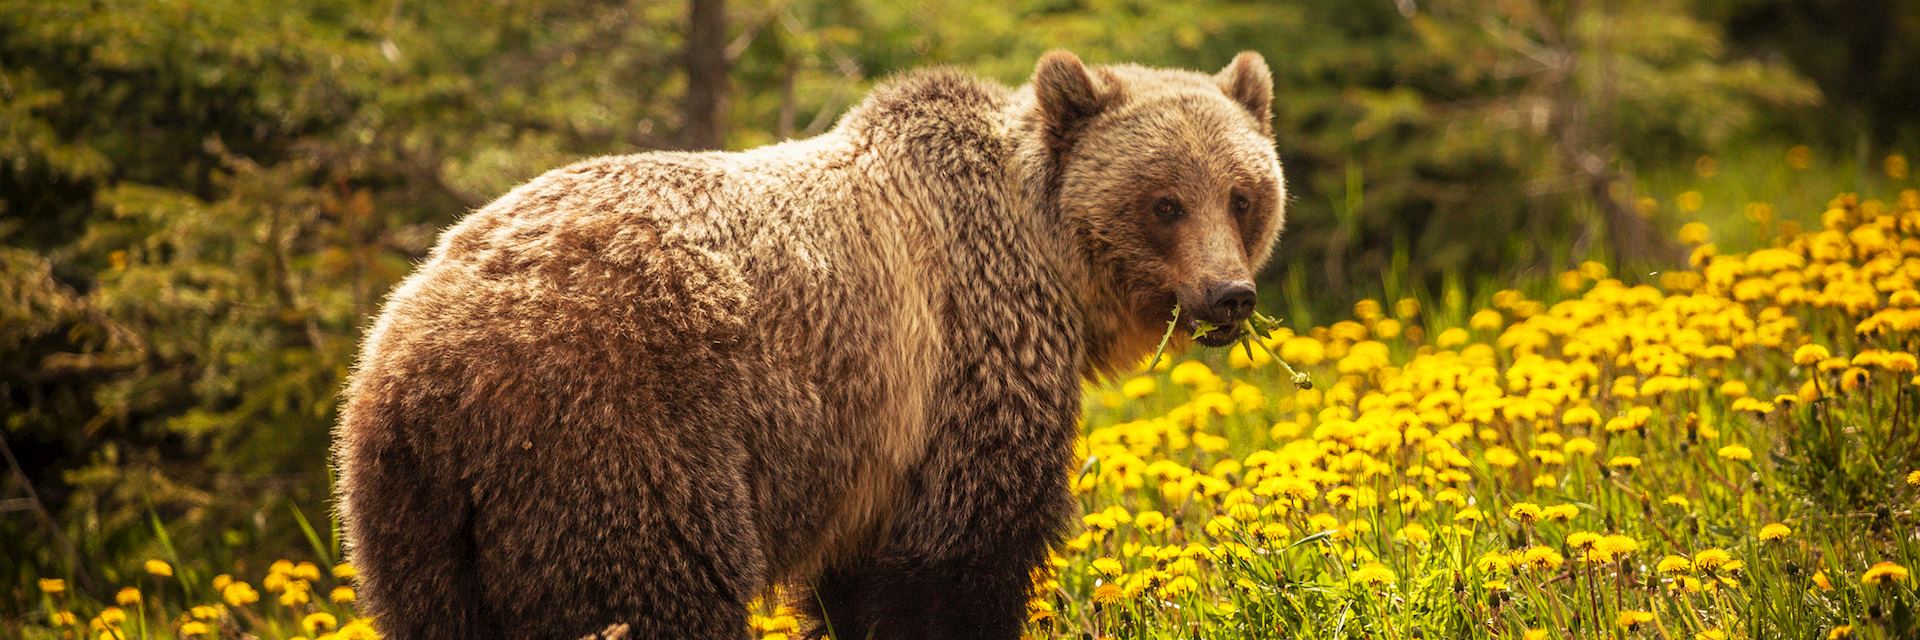 Grizzly bear, Banff National Park